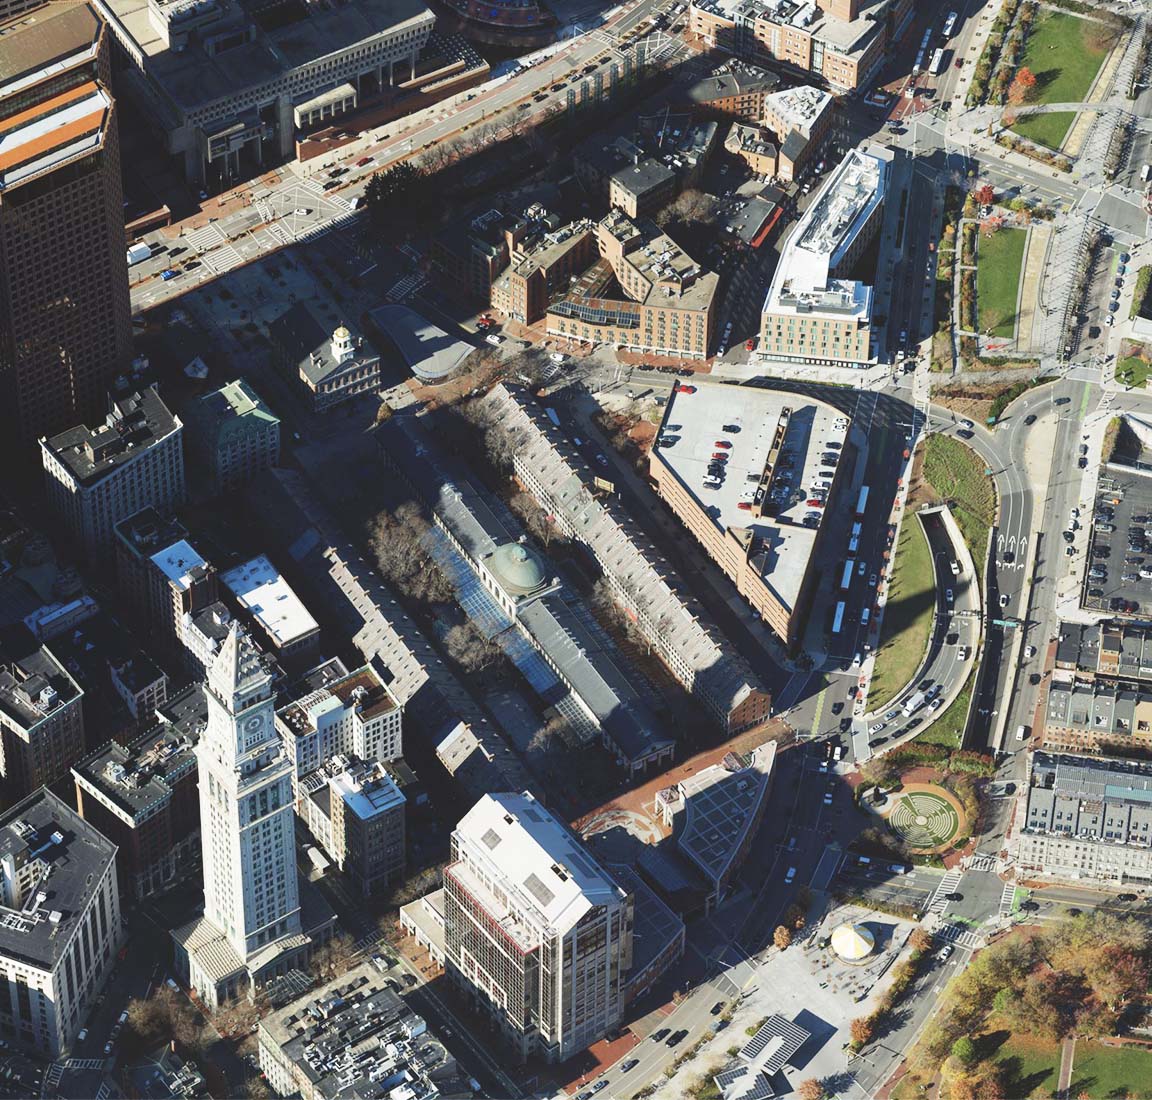 Background image is a photo of the city of Boston, foreground is 3D meshes of the City of Boston morphed together